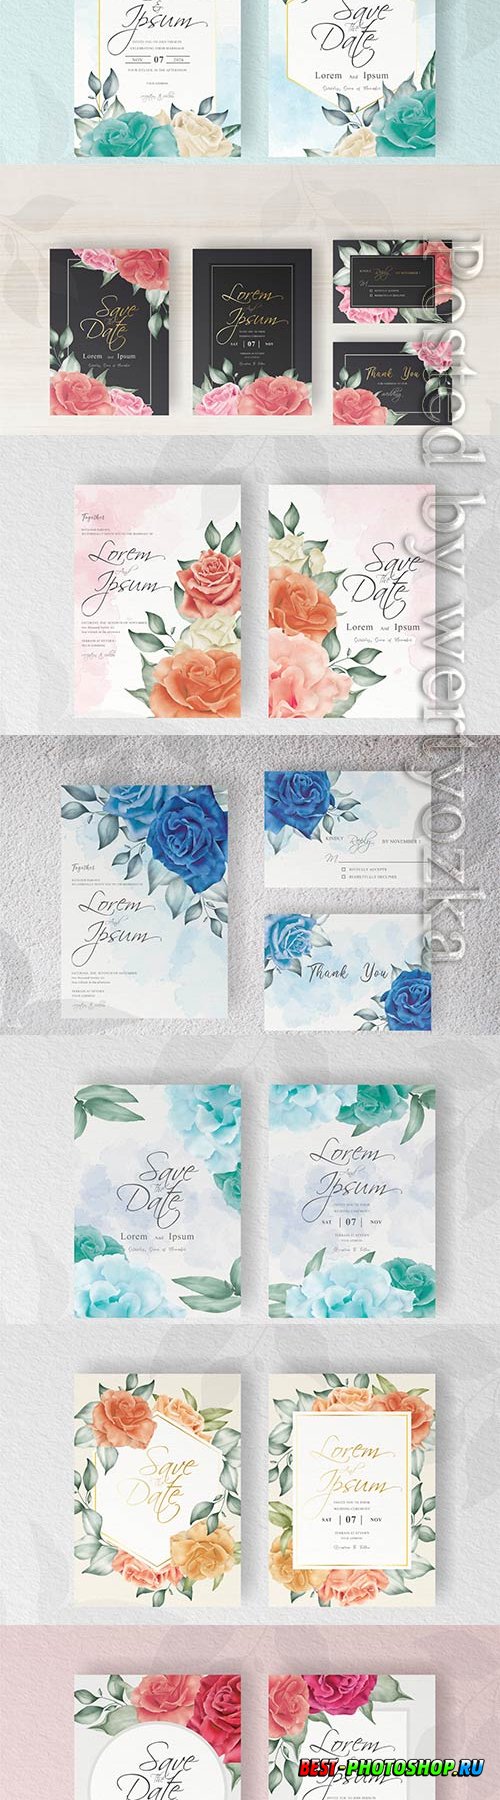 Elegant wedding invitation card template with hand painted floral and leaves